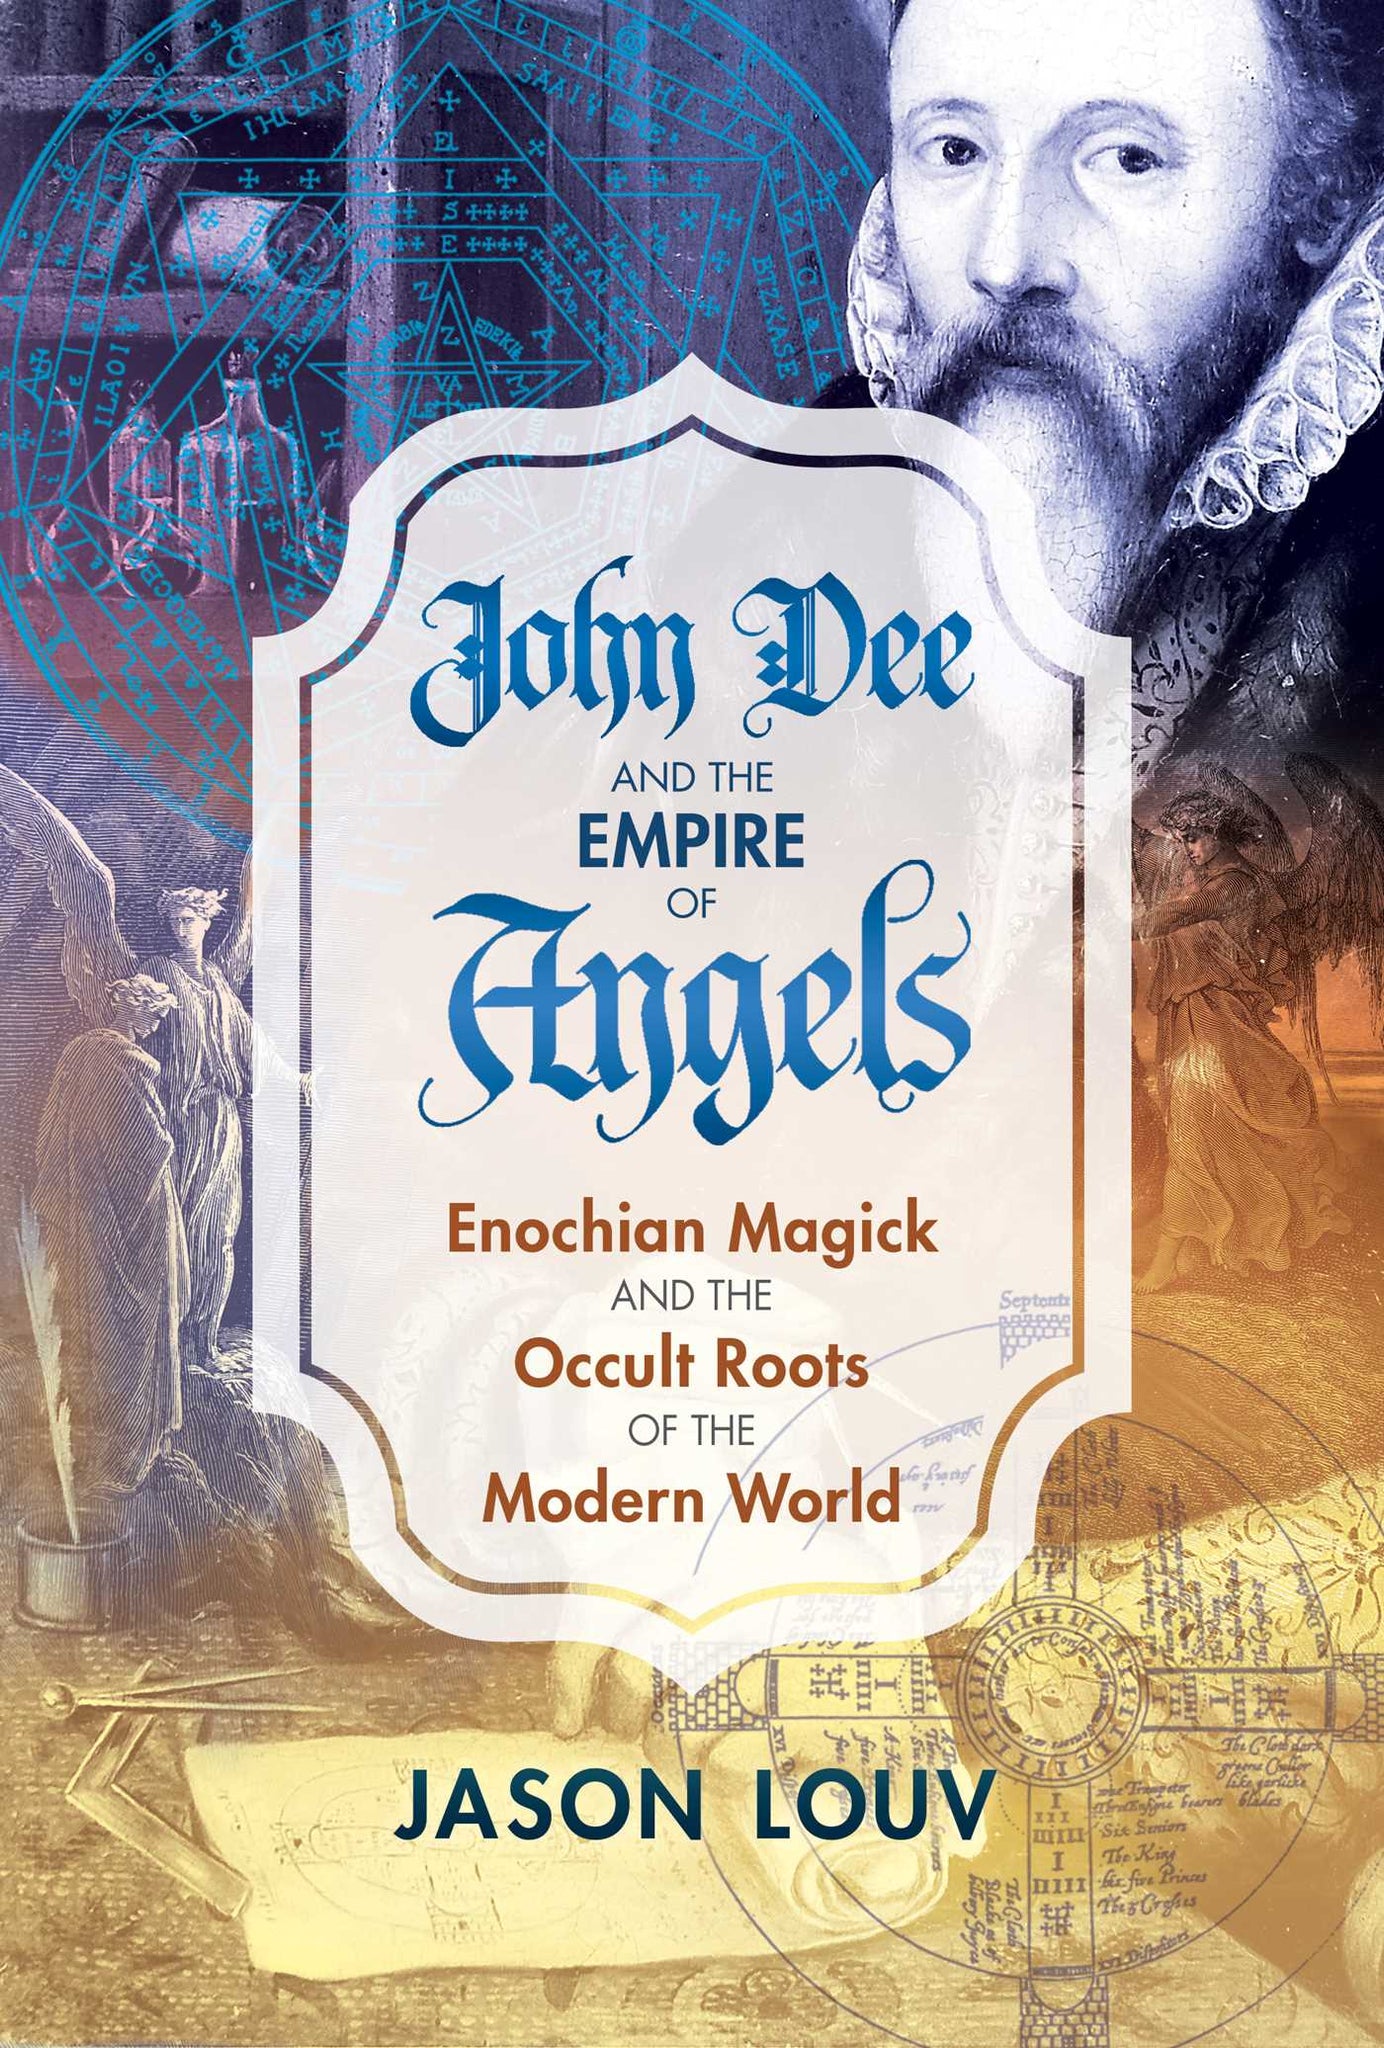 John Dee and the Empire of Angels (Hardcover) By Jason Louv